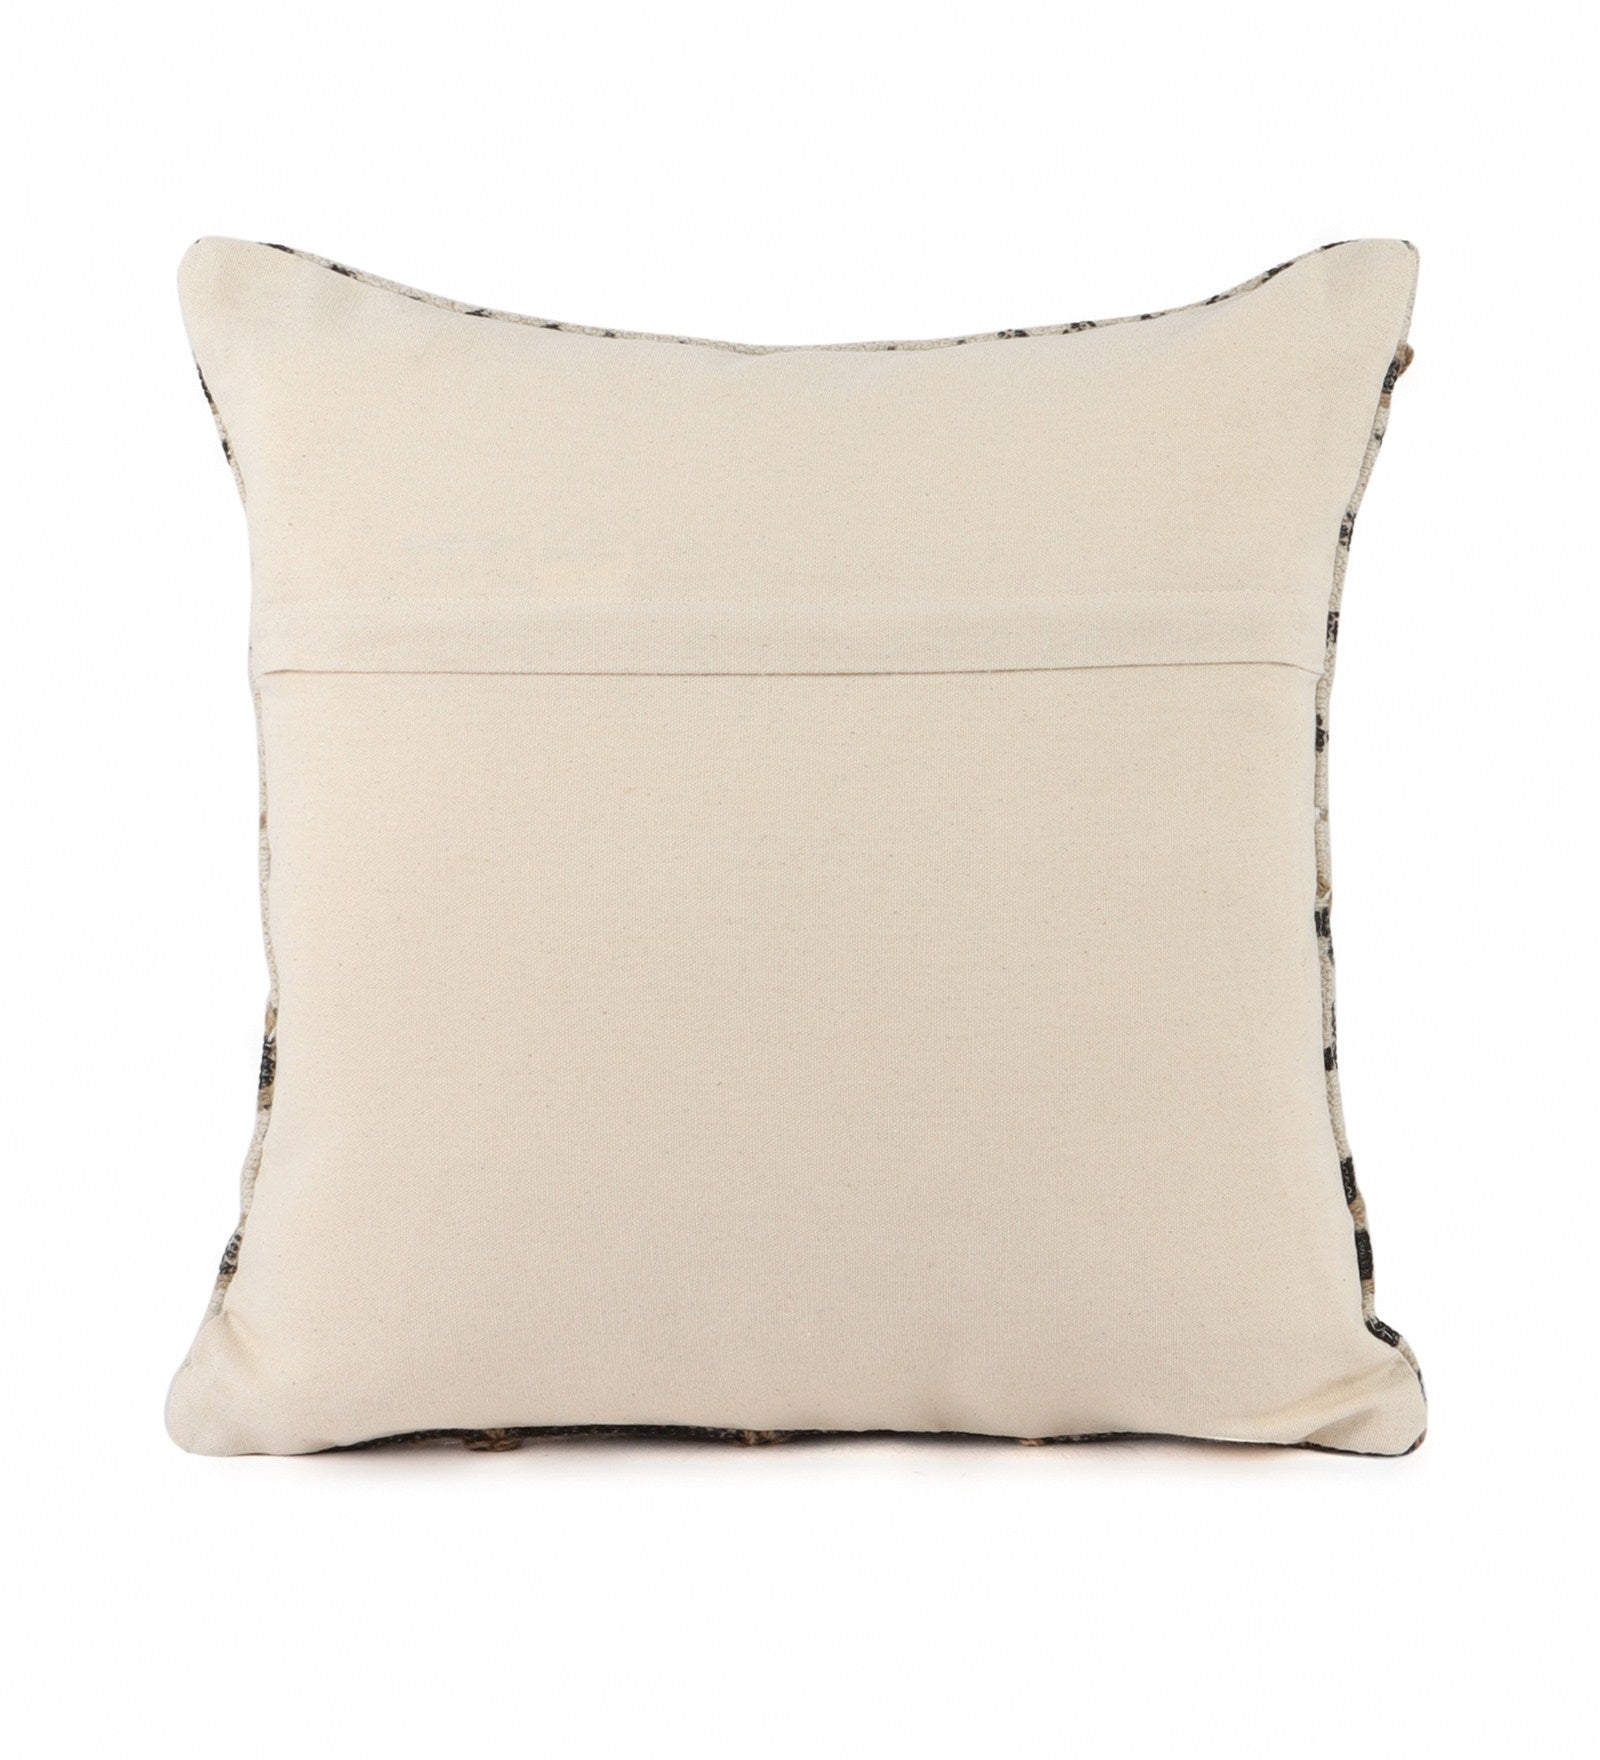 Embroidered Contemporary Cushion Cover (Beige Knots)